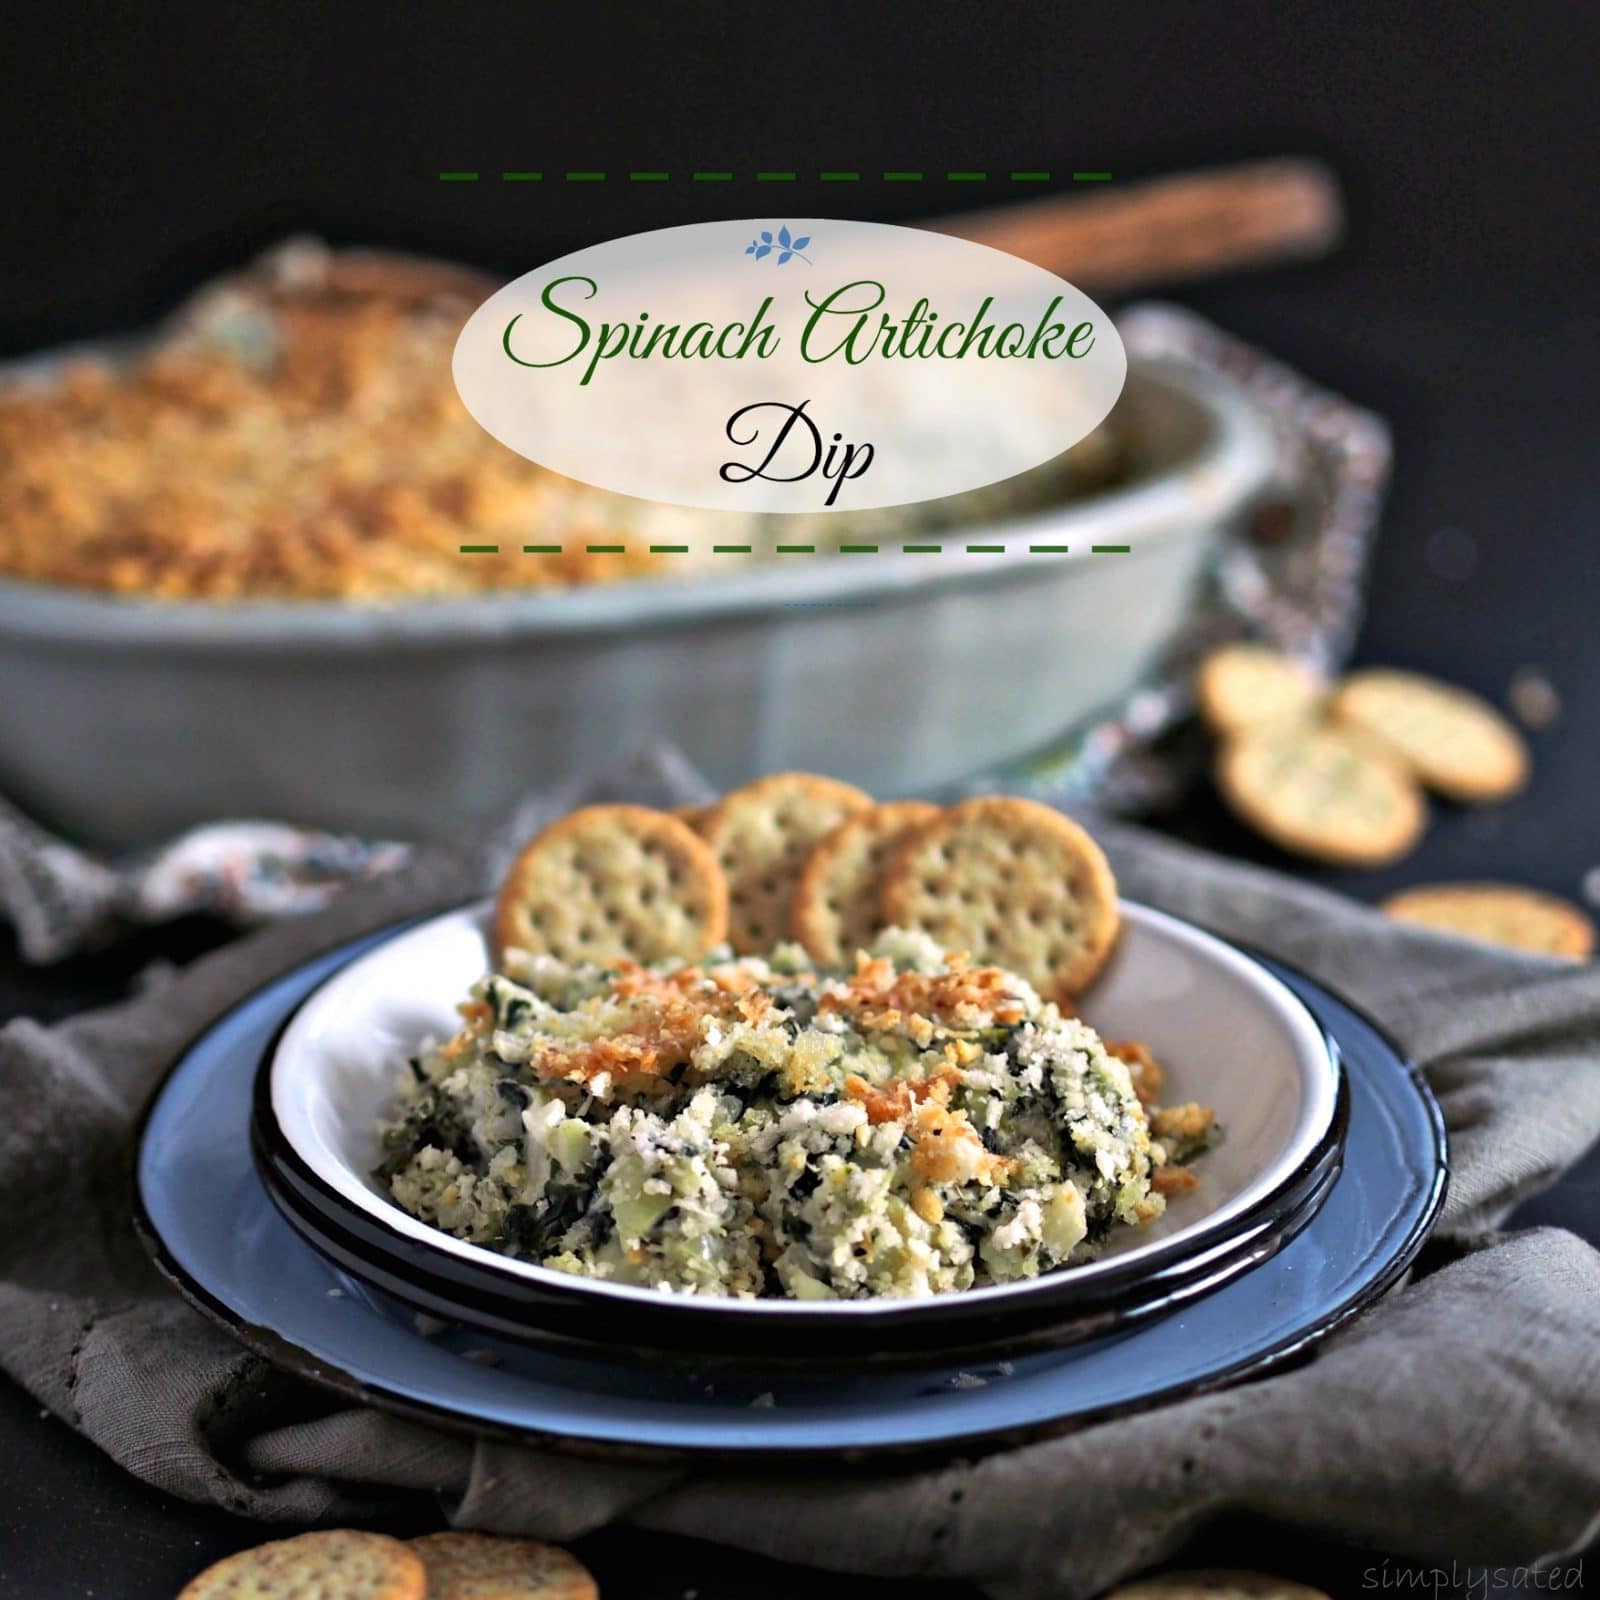 Spinach Artichoke Dip.  A blend of four cheeses, water chestnuts for crunch, a touch of heat with red pepper and lemon juice to brighten things up.  Enjoy! Simply Sated